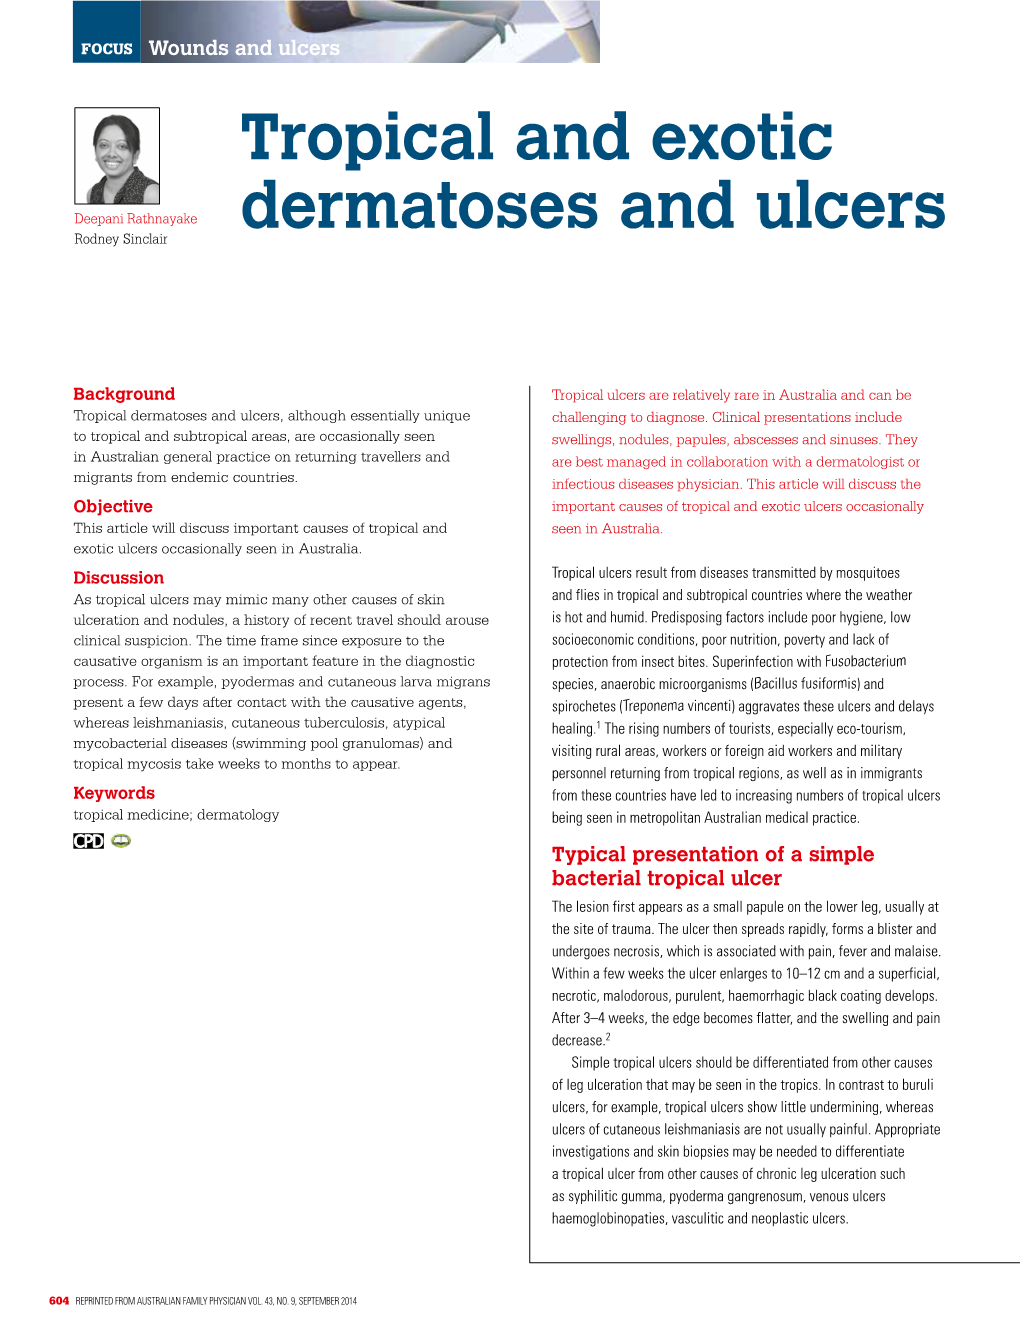 Tropical and Exotic Dermatoses and Ulcers